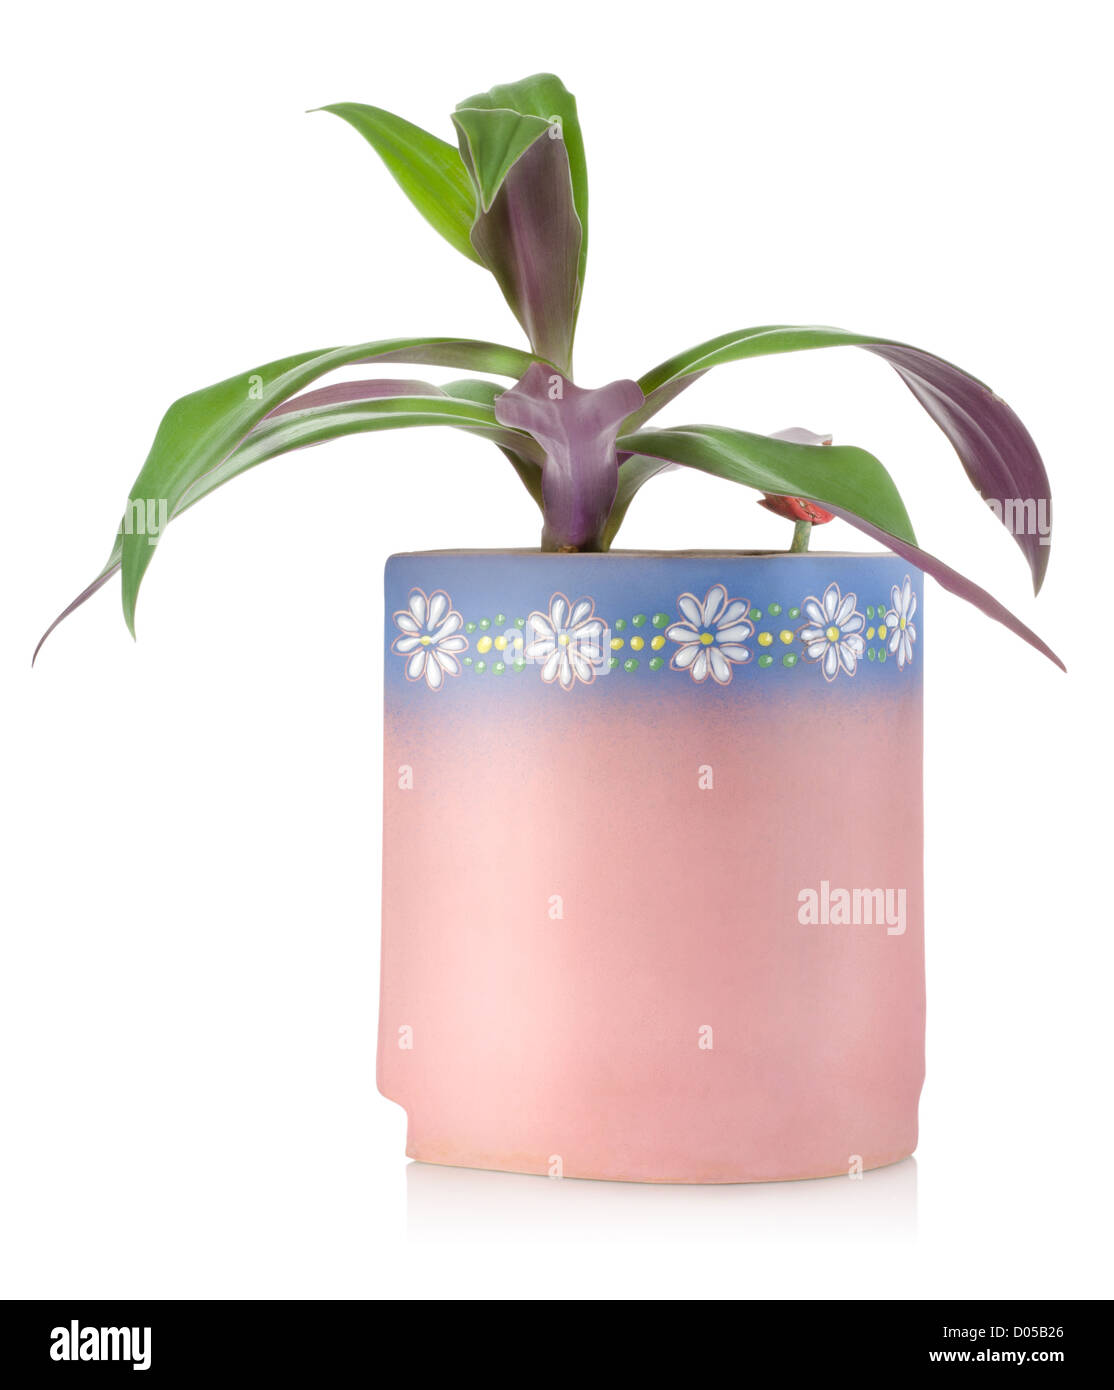 Potted plant isolated on a white background Stock Photo